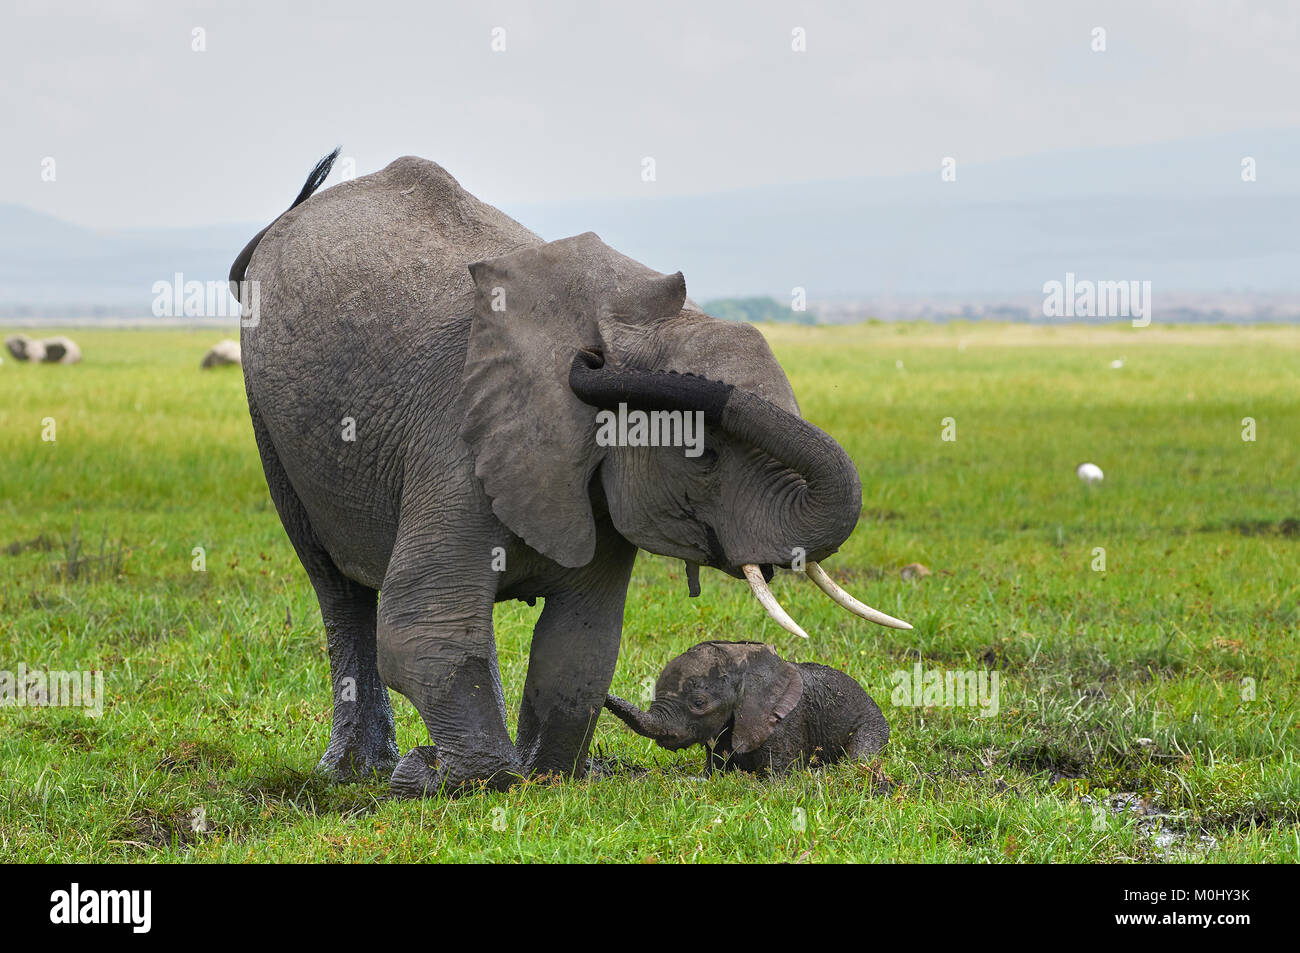 Day old elephant mother and calf struggling through swamp Stock Photo